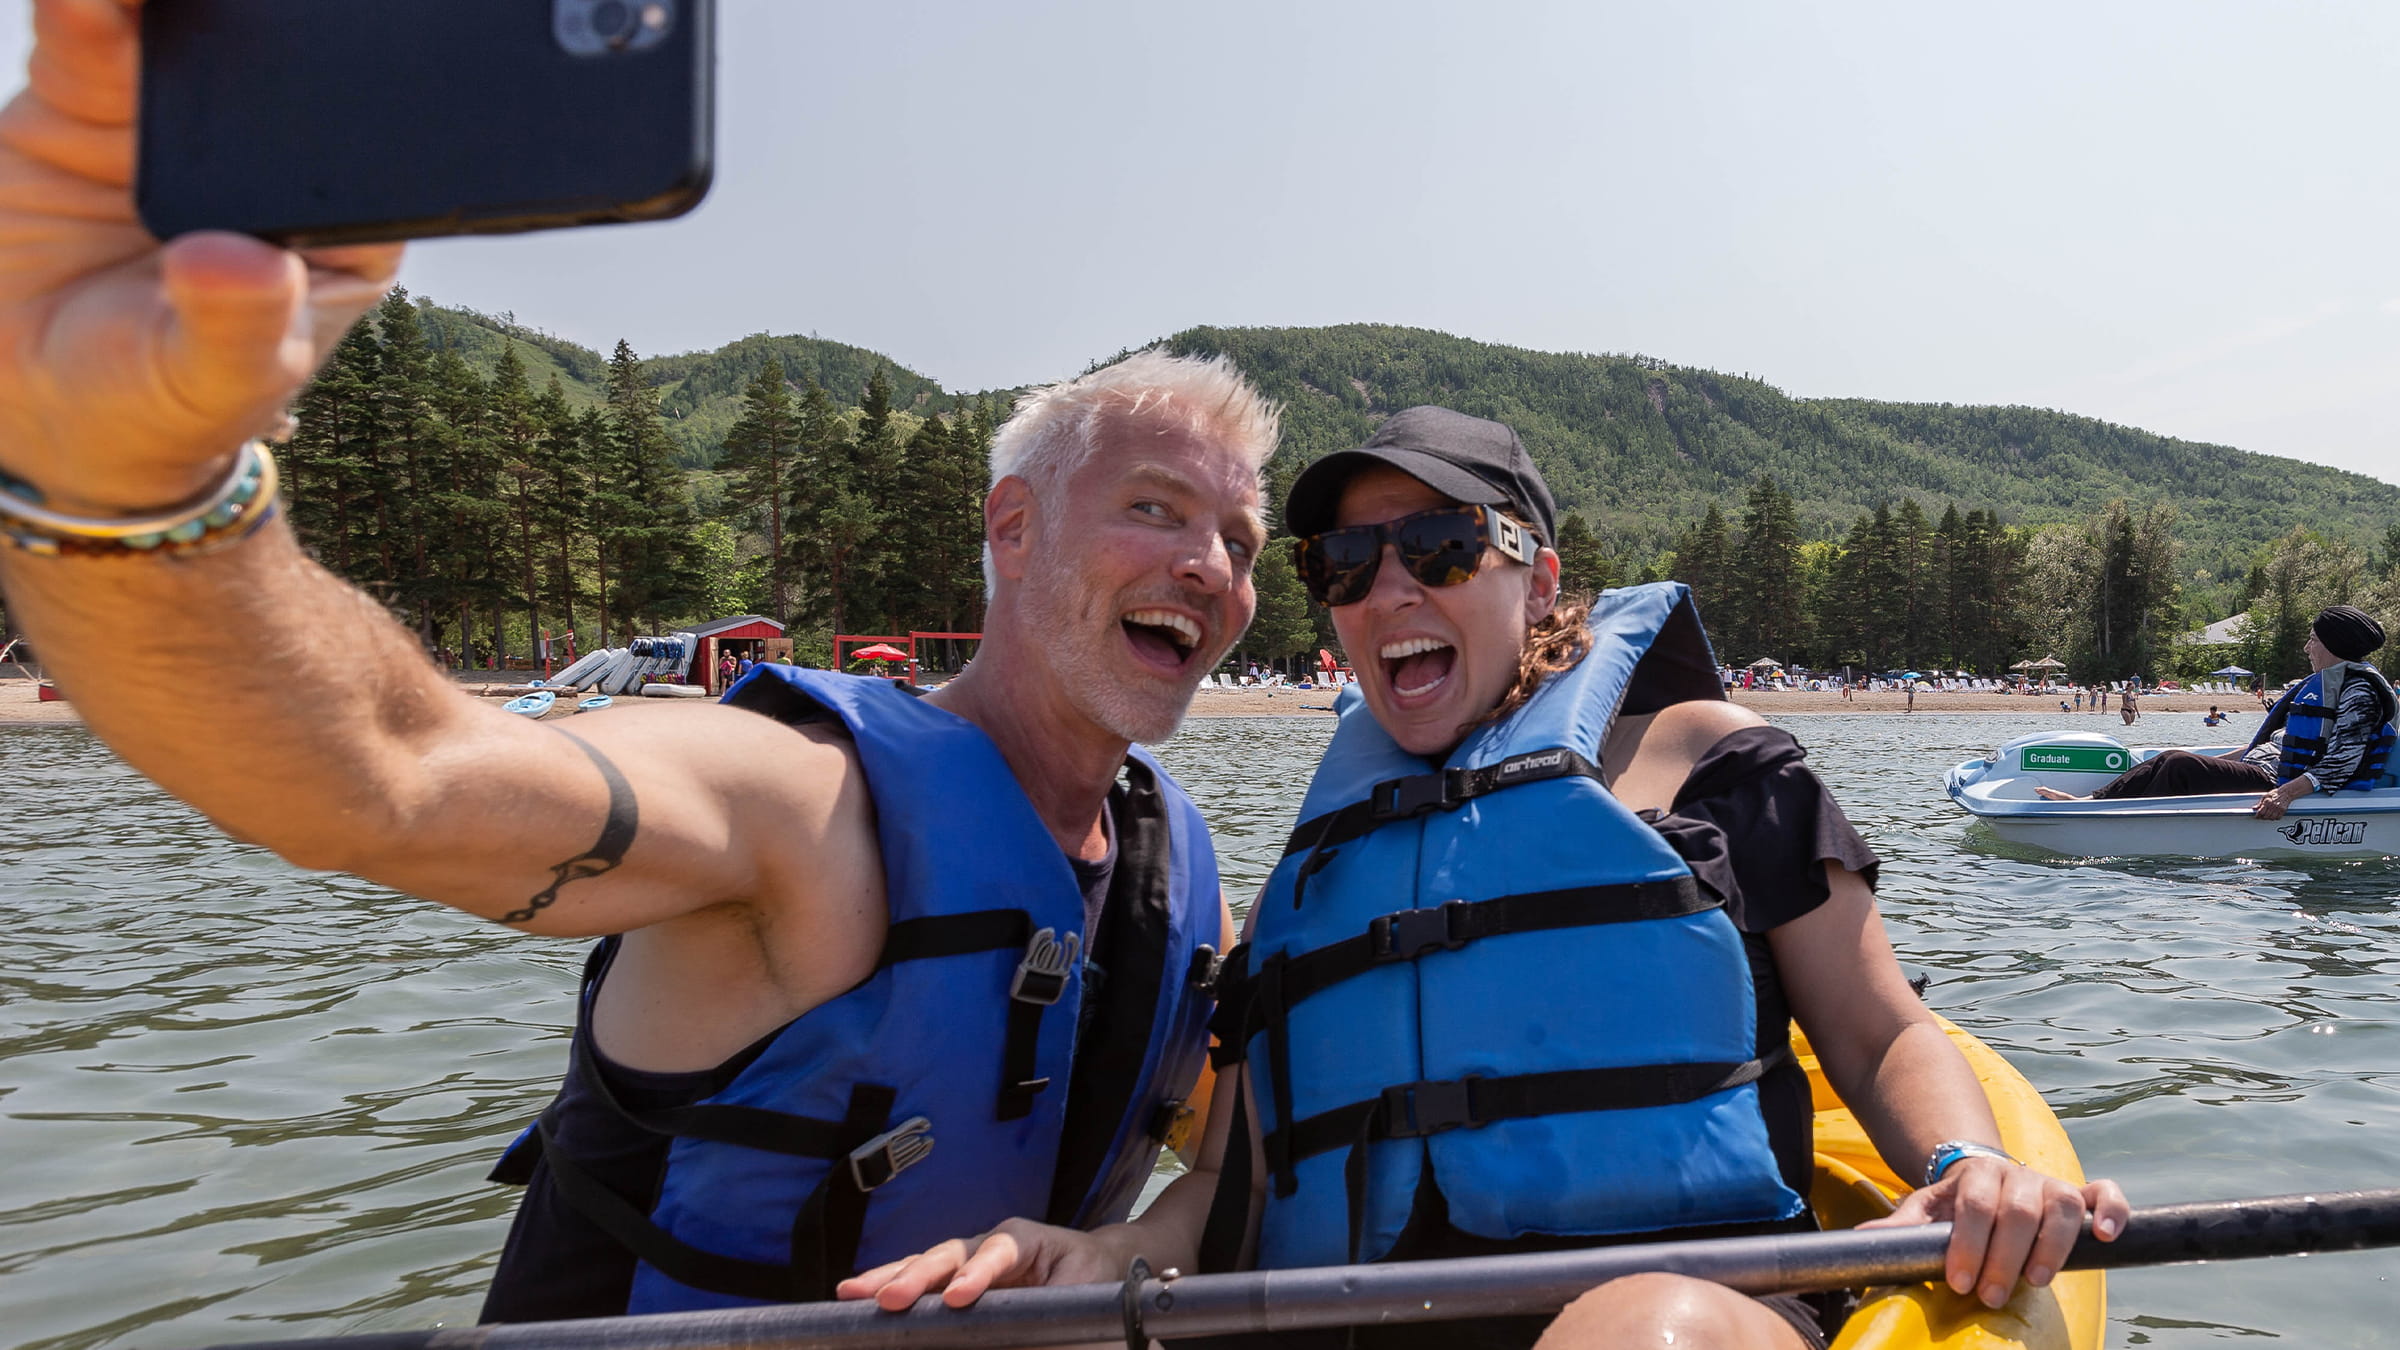 Two people in blue life jackets sitting in a kayak, taking a selfie with a smartphone, smiling widely, with a scenic background of green hills and trees.